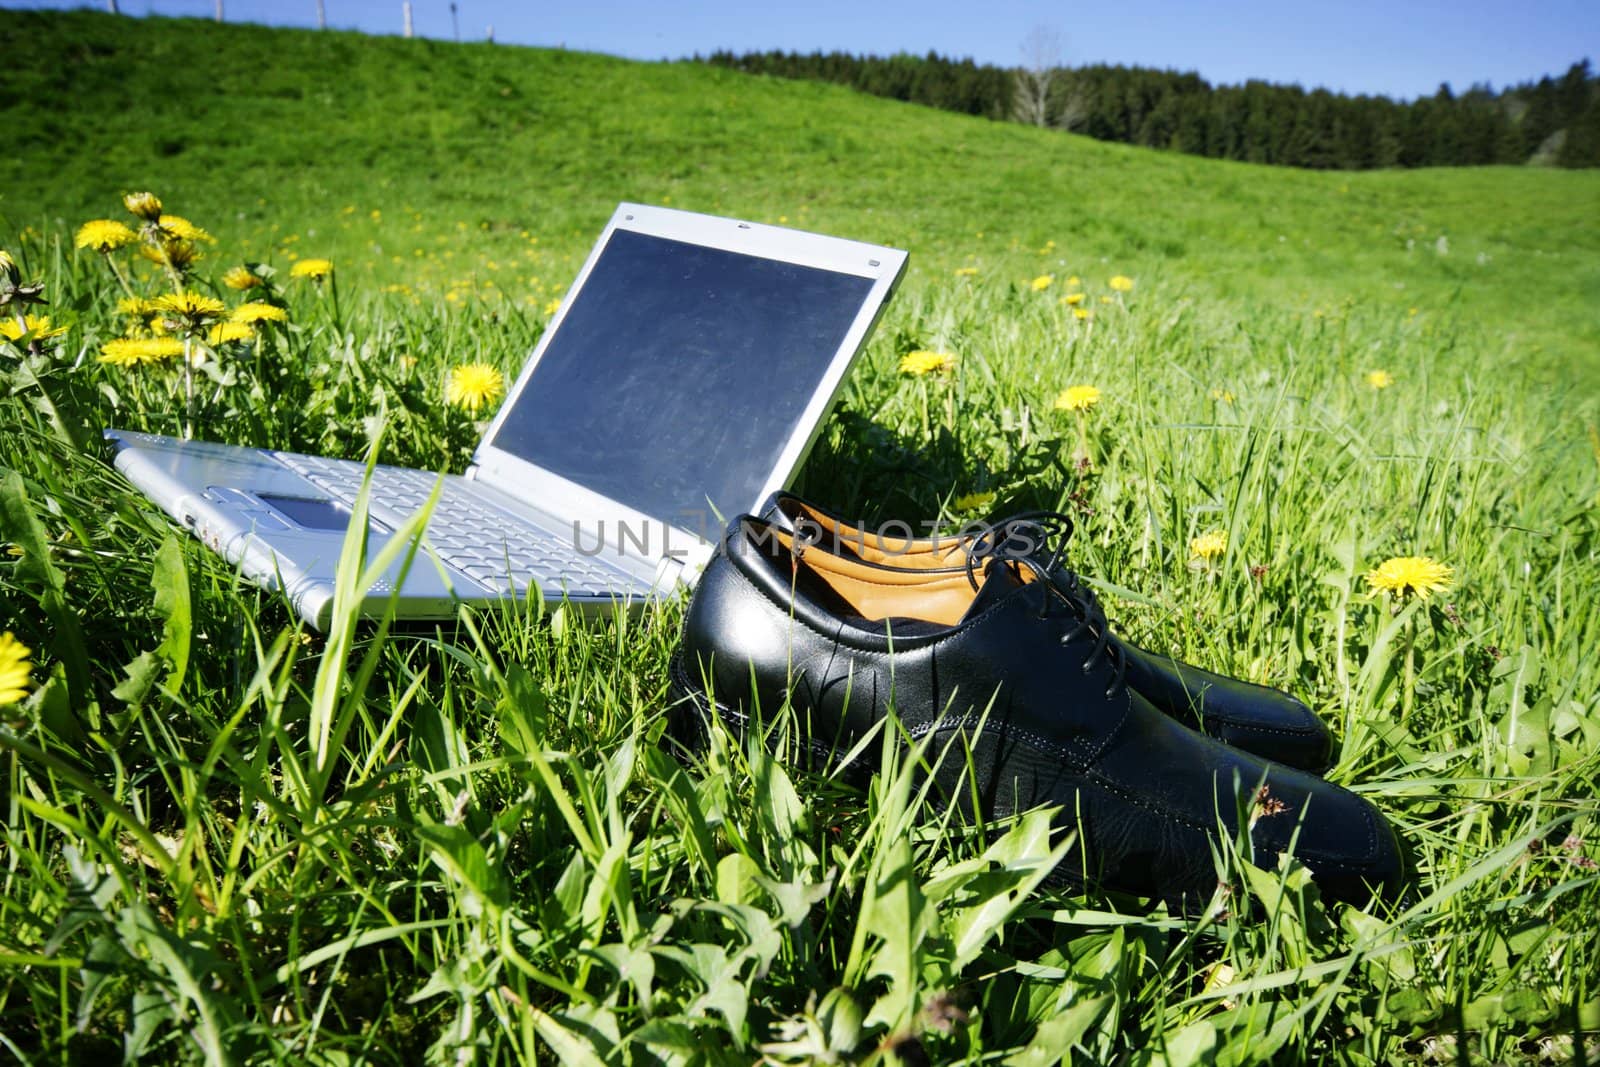 laptop in grass as a symbol for fieldwork,leisure or holiday